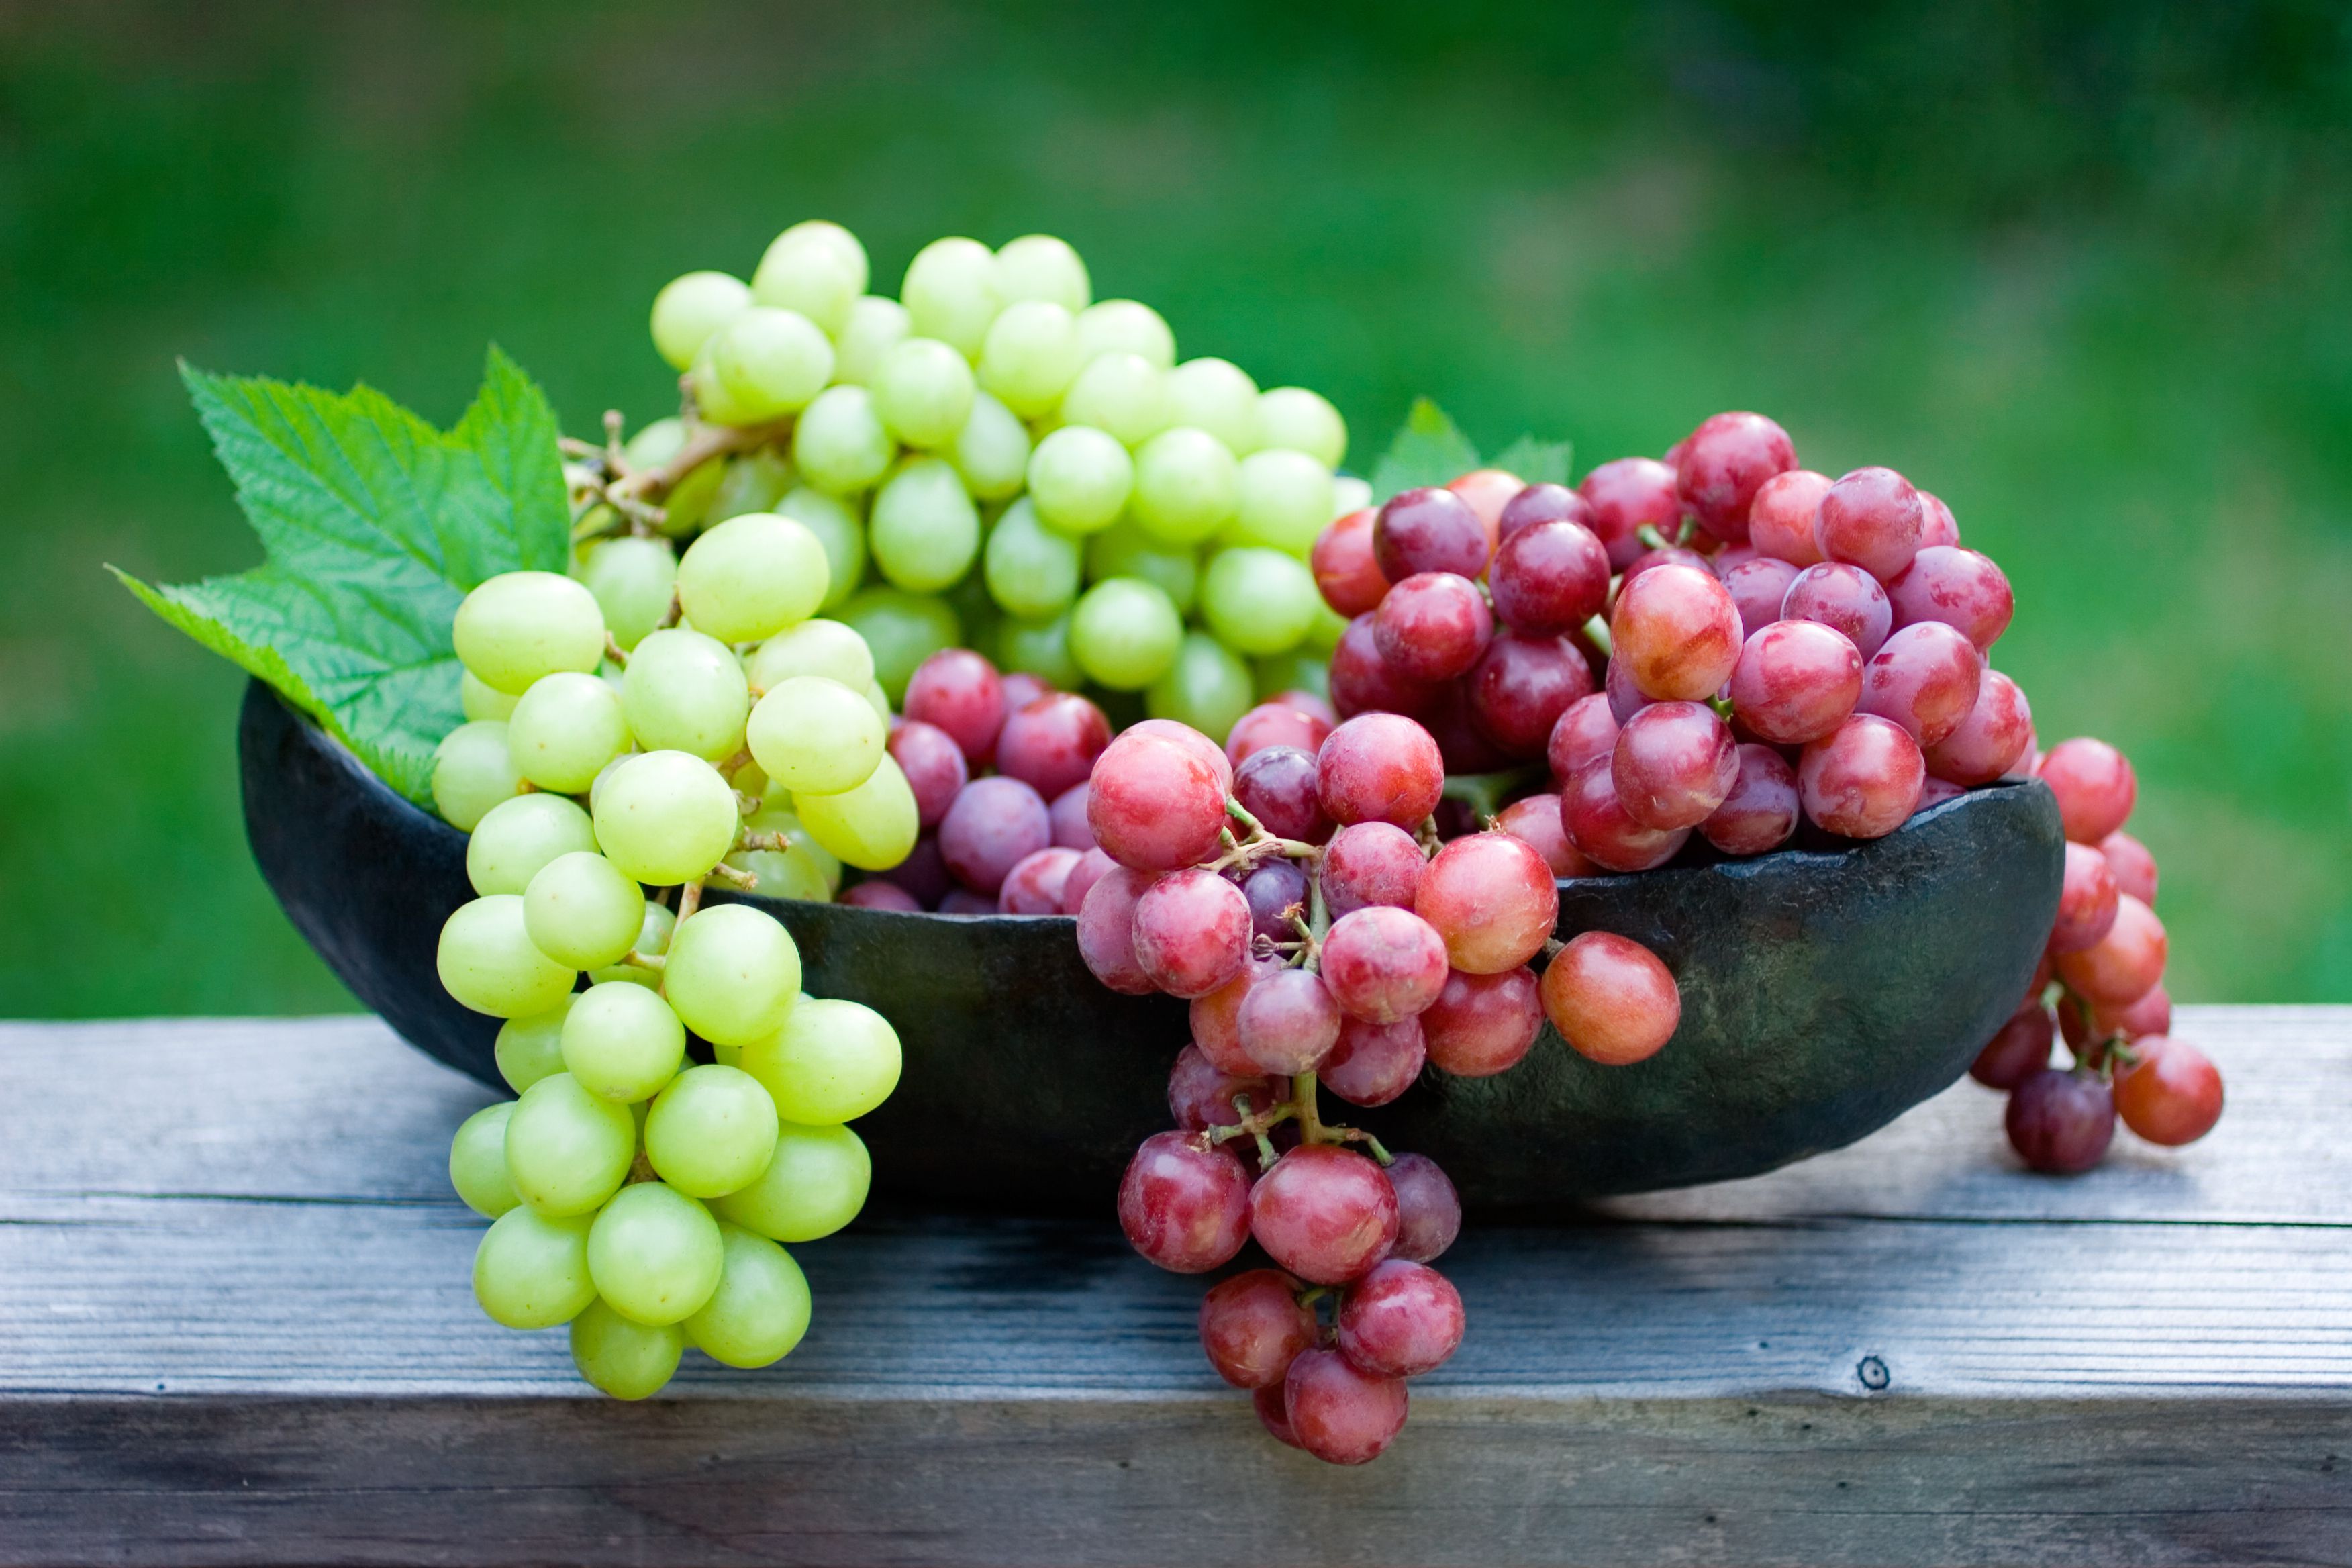 9 Health Benefits of Grapes - Are Red and Green Grapes Good for You?